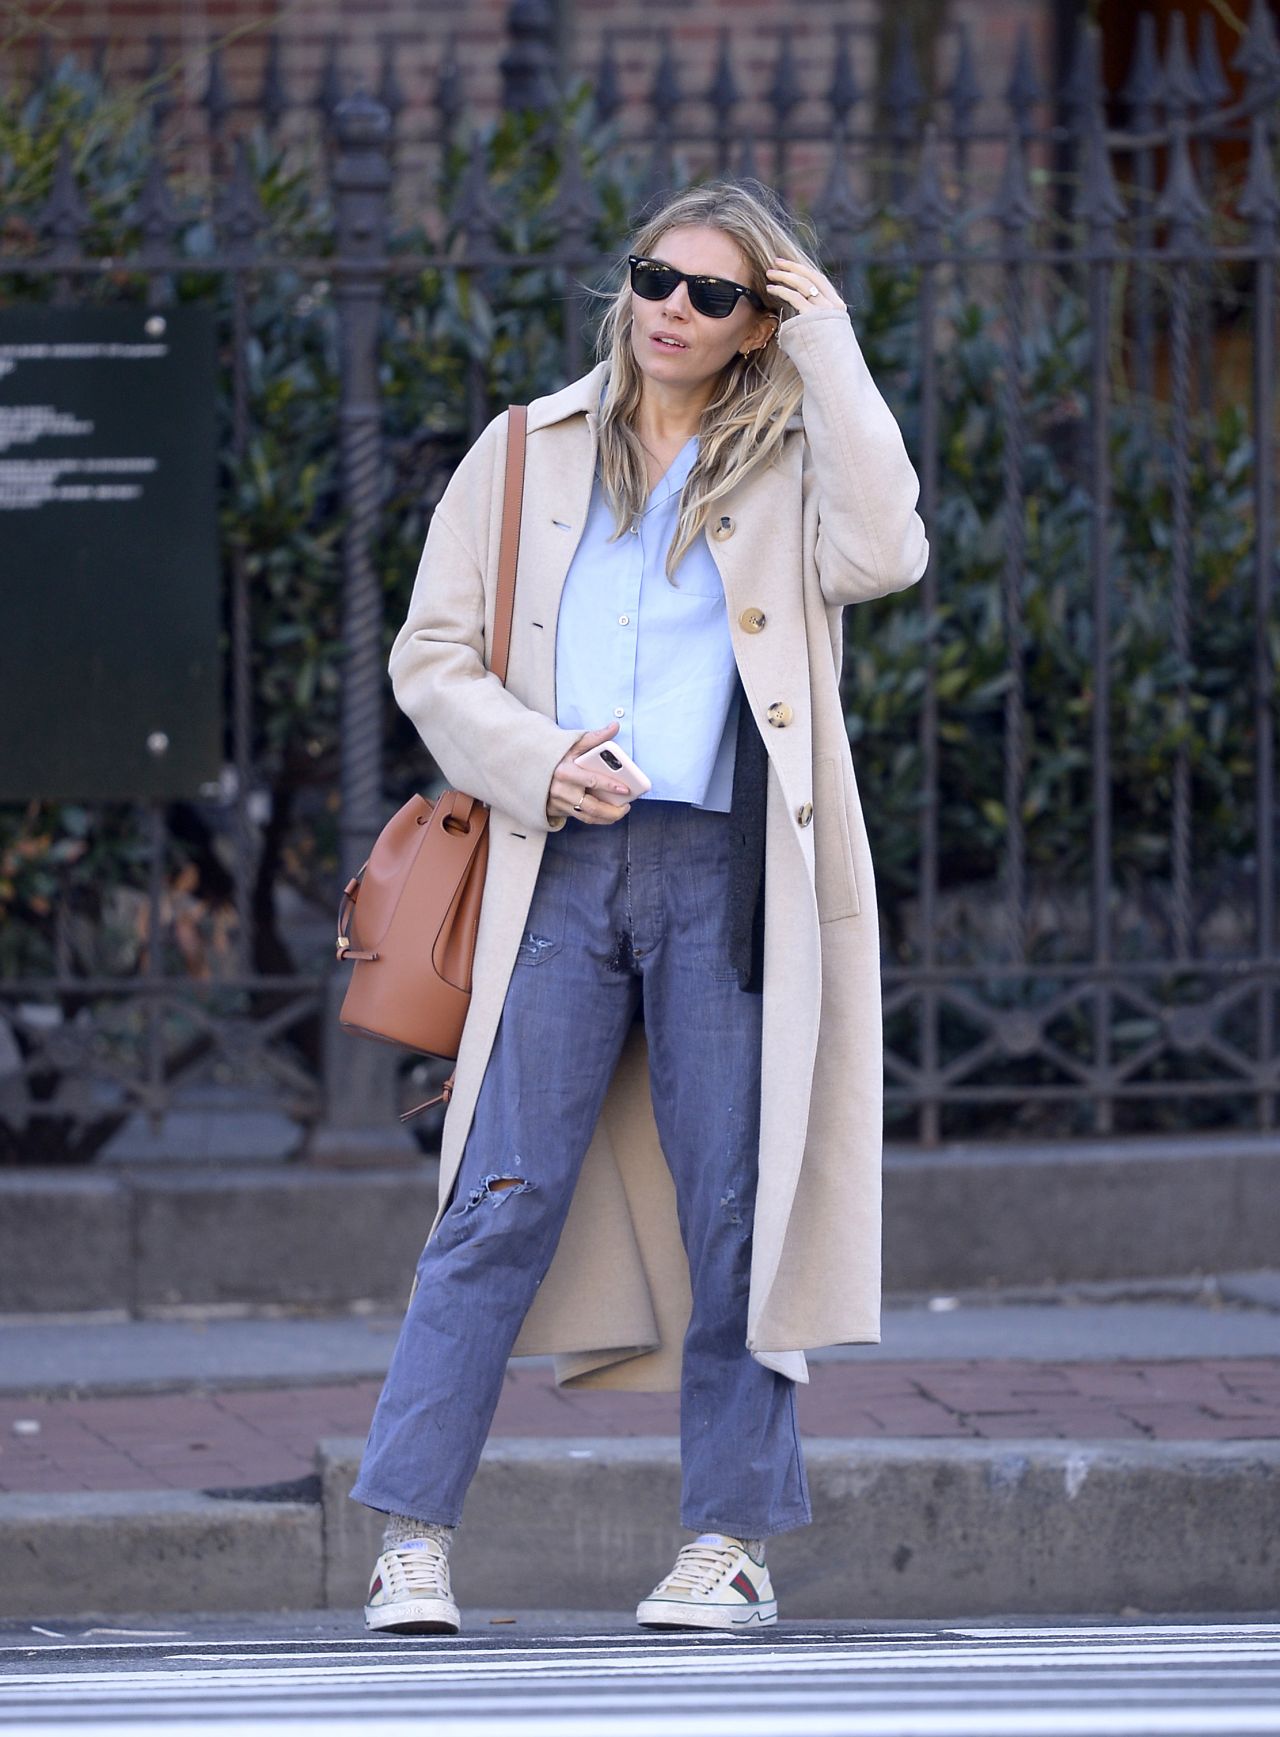 Sienna Miller in Casual Outfit - New York City 02/19/2020 • CelebMafia